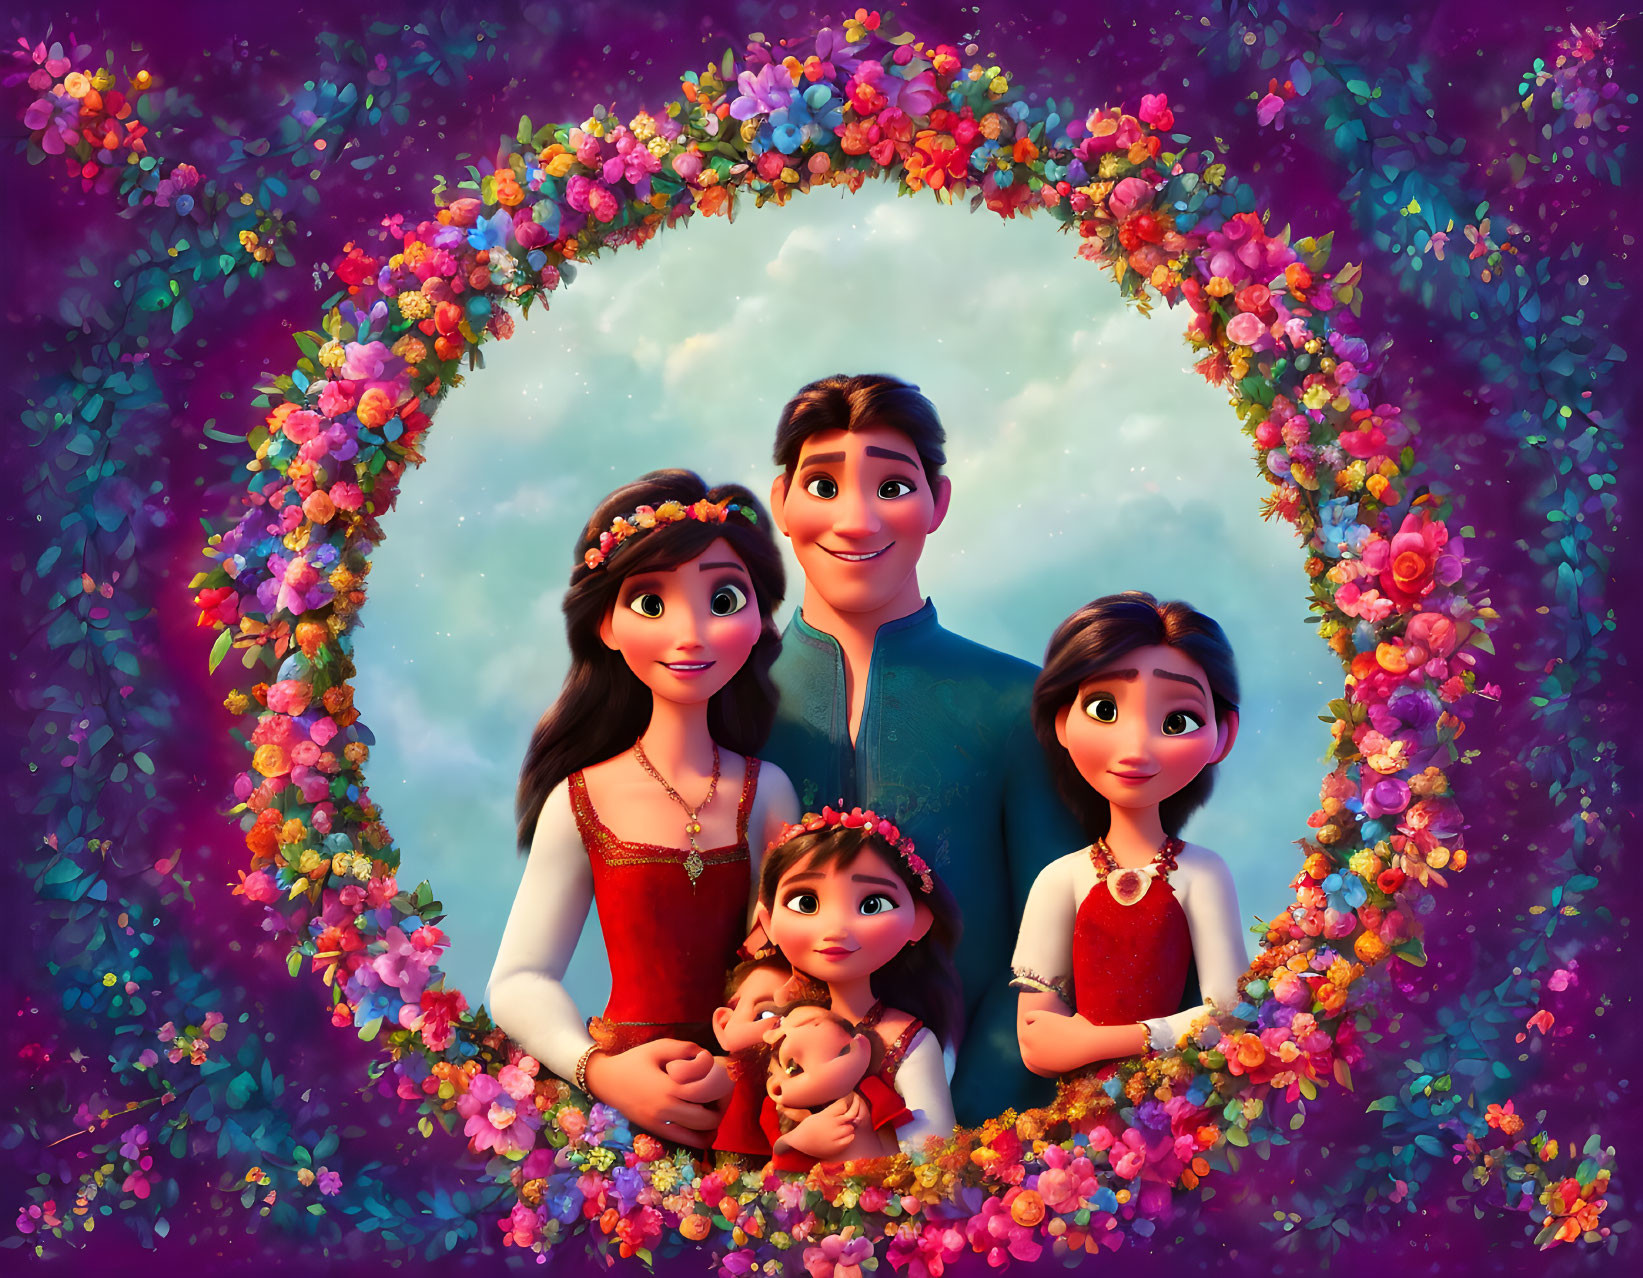 Illustration of family of four in heart-shaped floral wreath on gradient backdrop